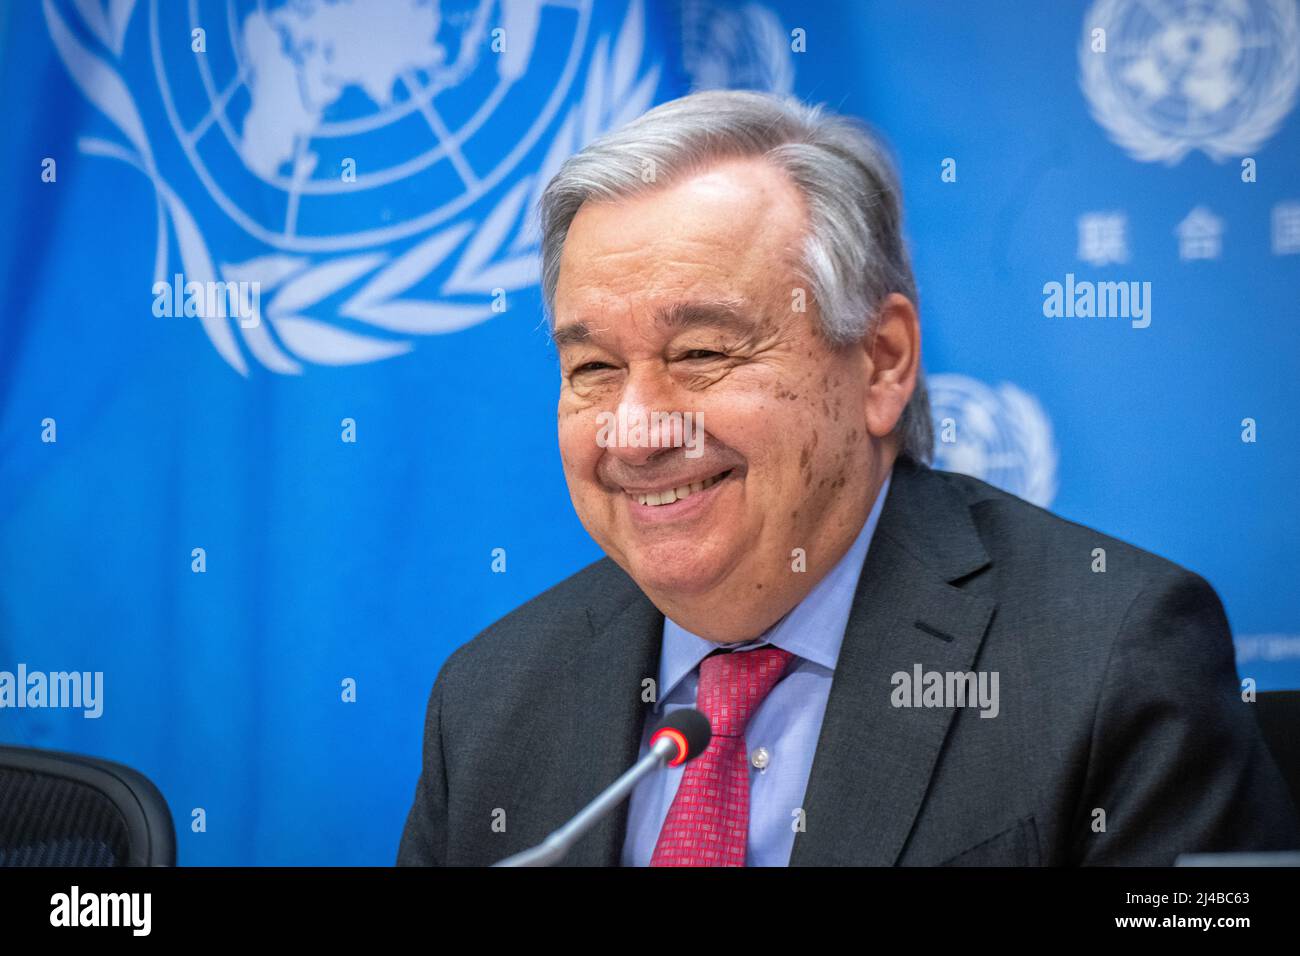 New York, USA. 13th Apr, 2022. United Nations Secretary-General Antonio Guterres speaks at the UN headquarters in New York City. Guterres presented a UN report on the global impact of war in Ukraine on food, energy and finance systems, and said that ' A humanitarian ceasefire in Ukraine does not seem possible at the moment'. Credit: Enrique Shore/Alamy Live News Stock Photo